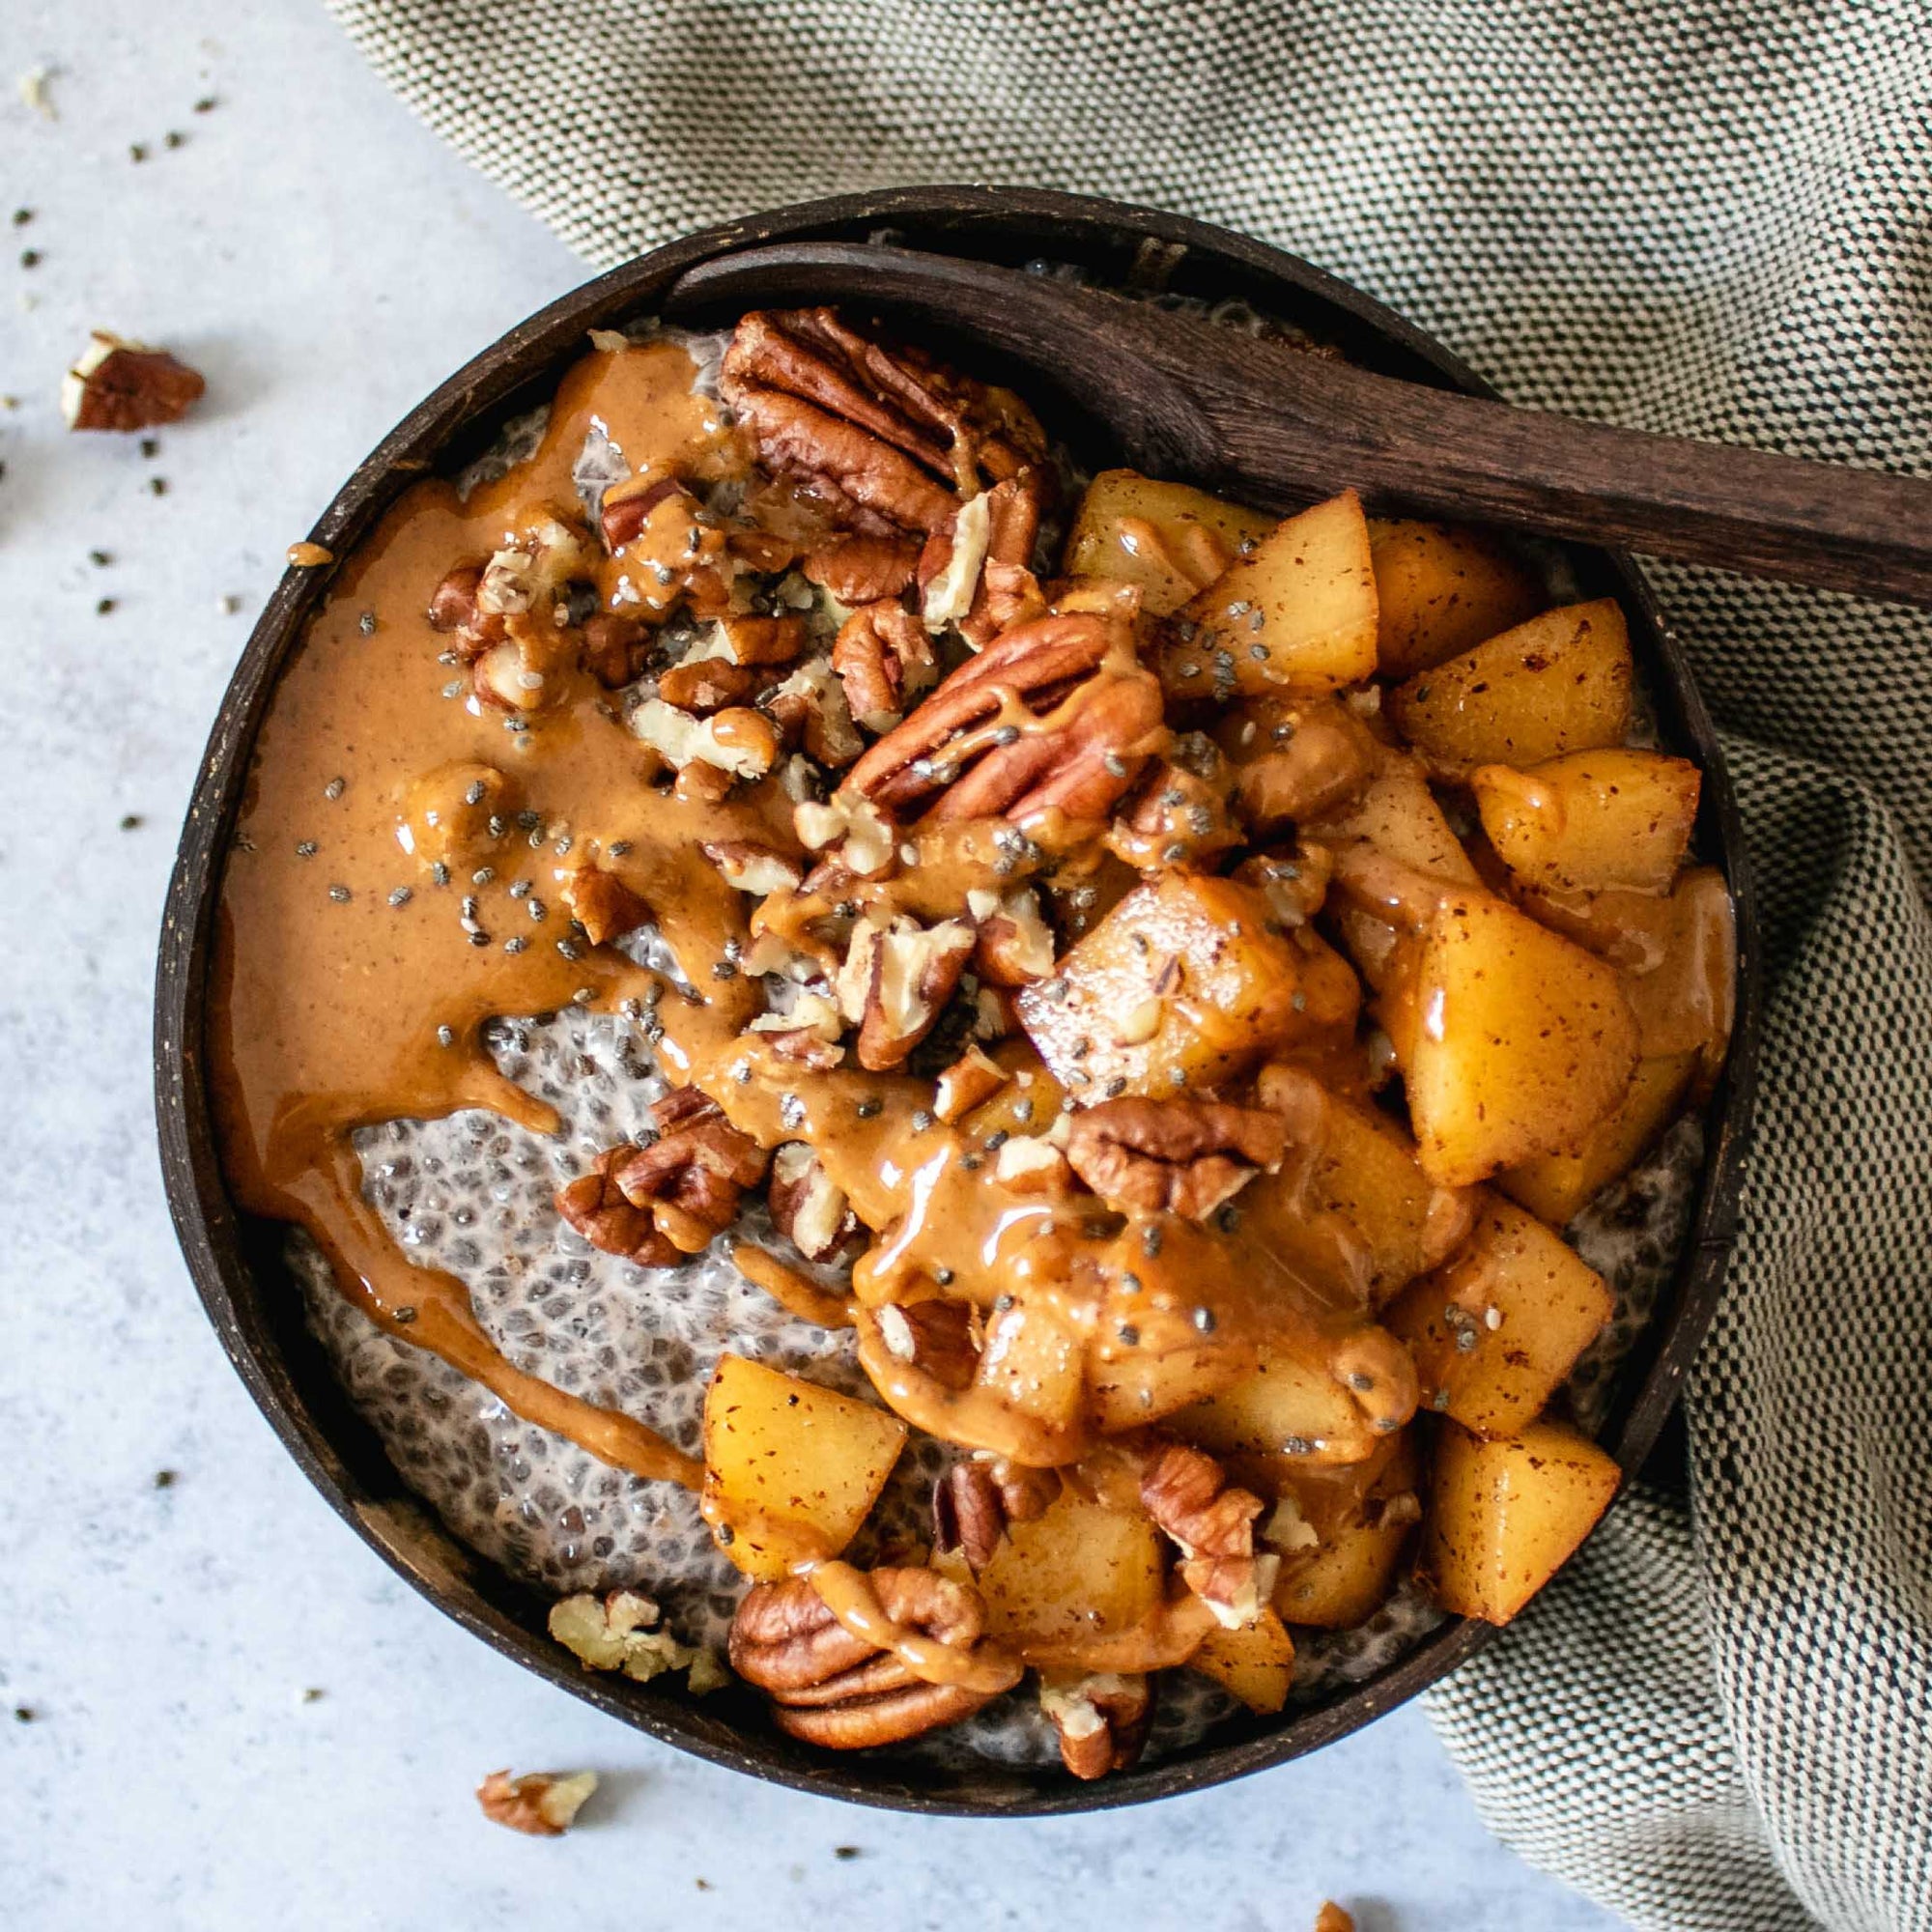 Warm Chai Spiced Chia Pudding with Cinnamon Apples